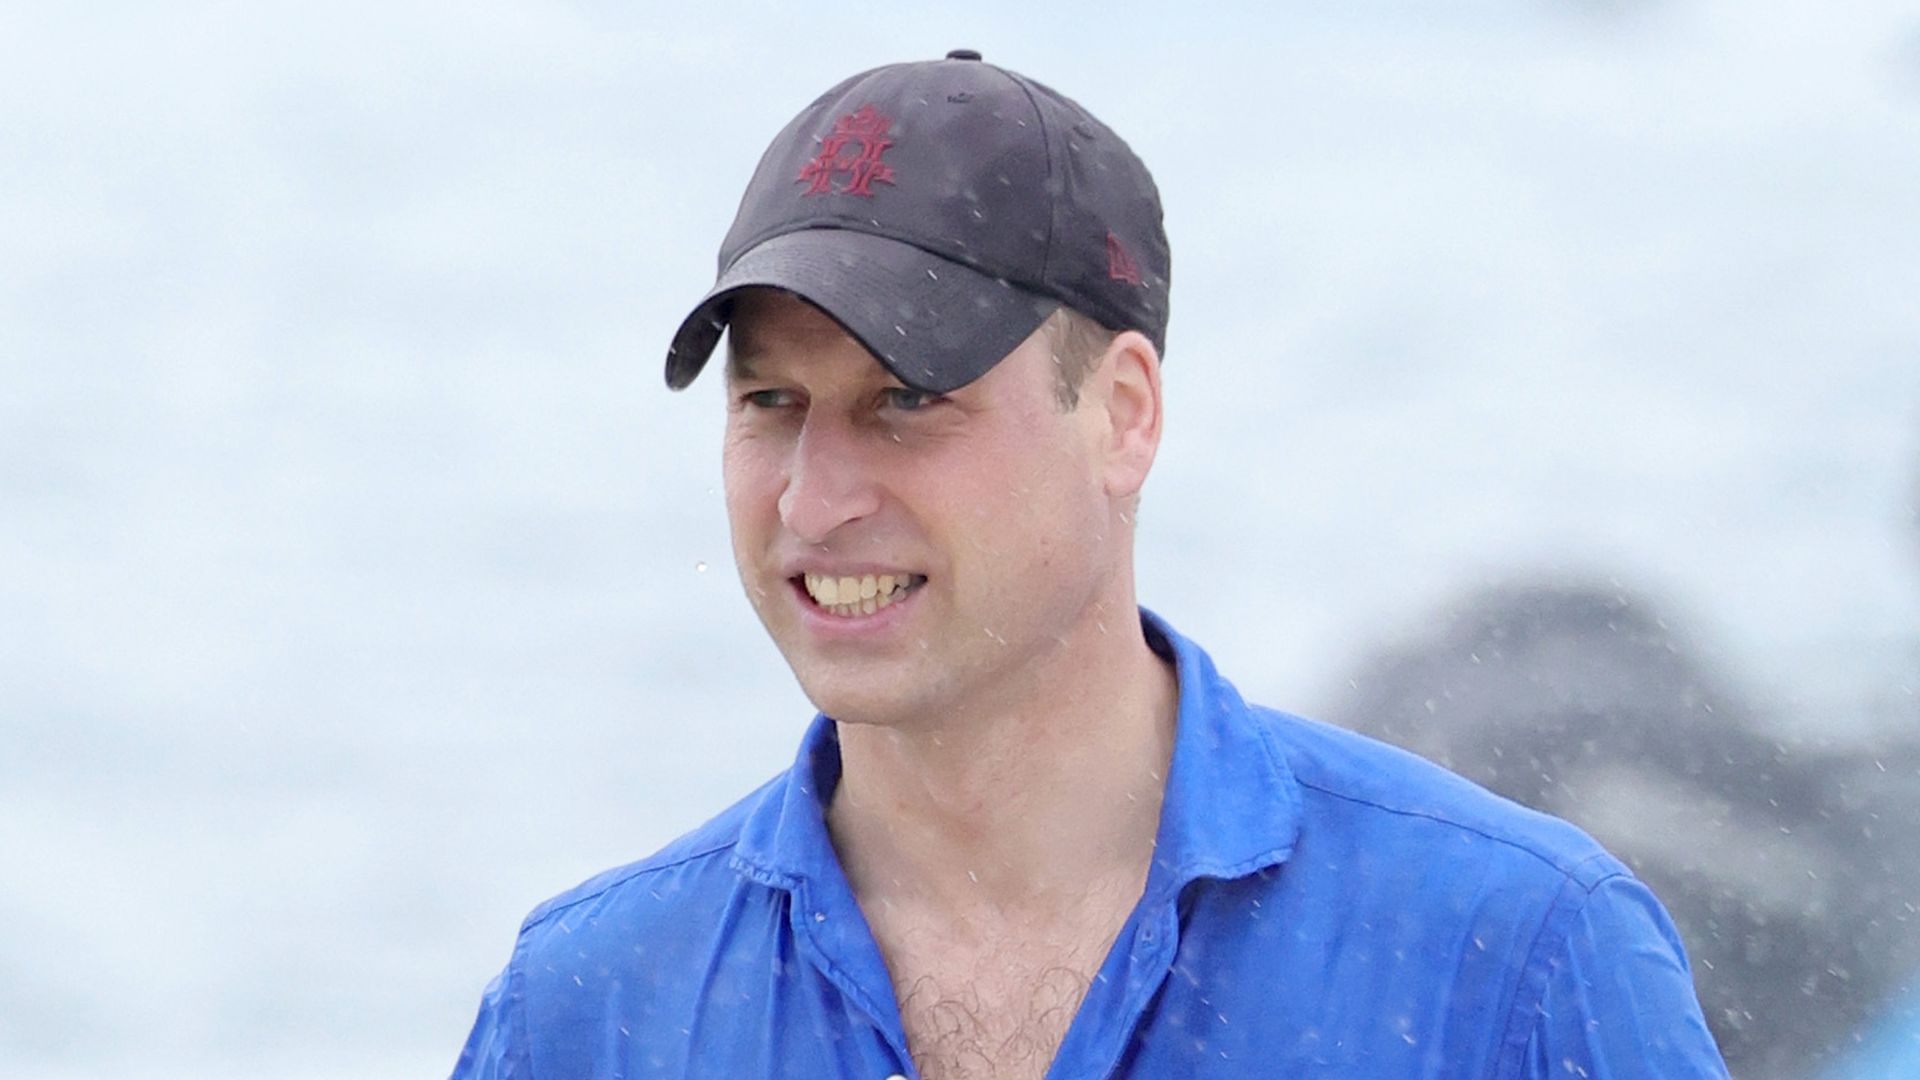 Prince William, Duke of Cambridge is wet after a boat ride with Catherine, Duchess of Cambridge as they attend the Platinum Jubilee Sailing Regatta n day seven of the Royal Tour of the Caribbean on March 25, 2022 in Nassau, Bahamas.